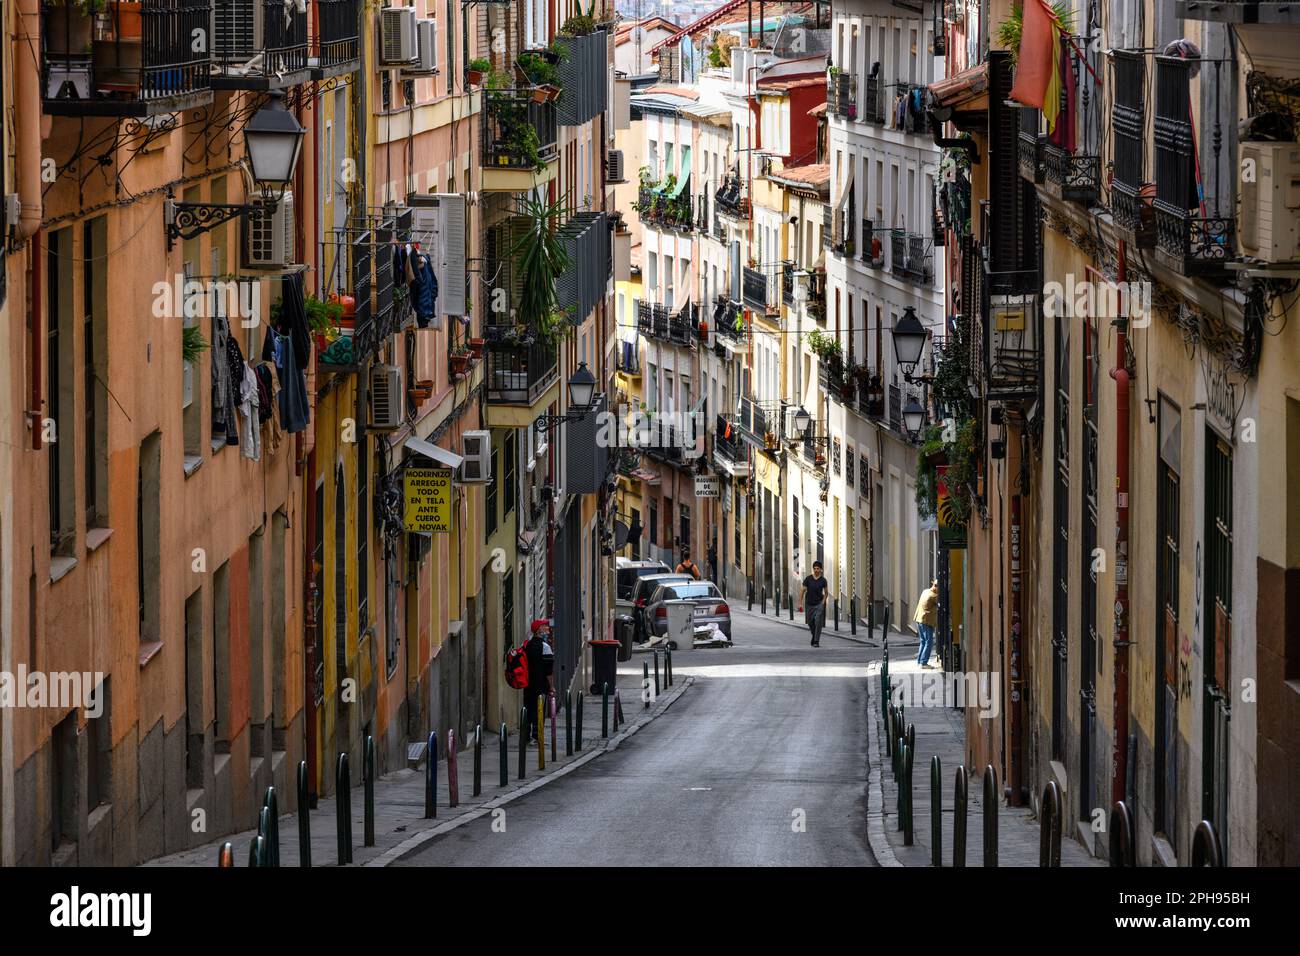 Looking down the calle de Buenavista which leads into the popular, multicultural district of Lavapies, in the center of Embajadores, central Madrid, S Stock Photo